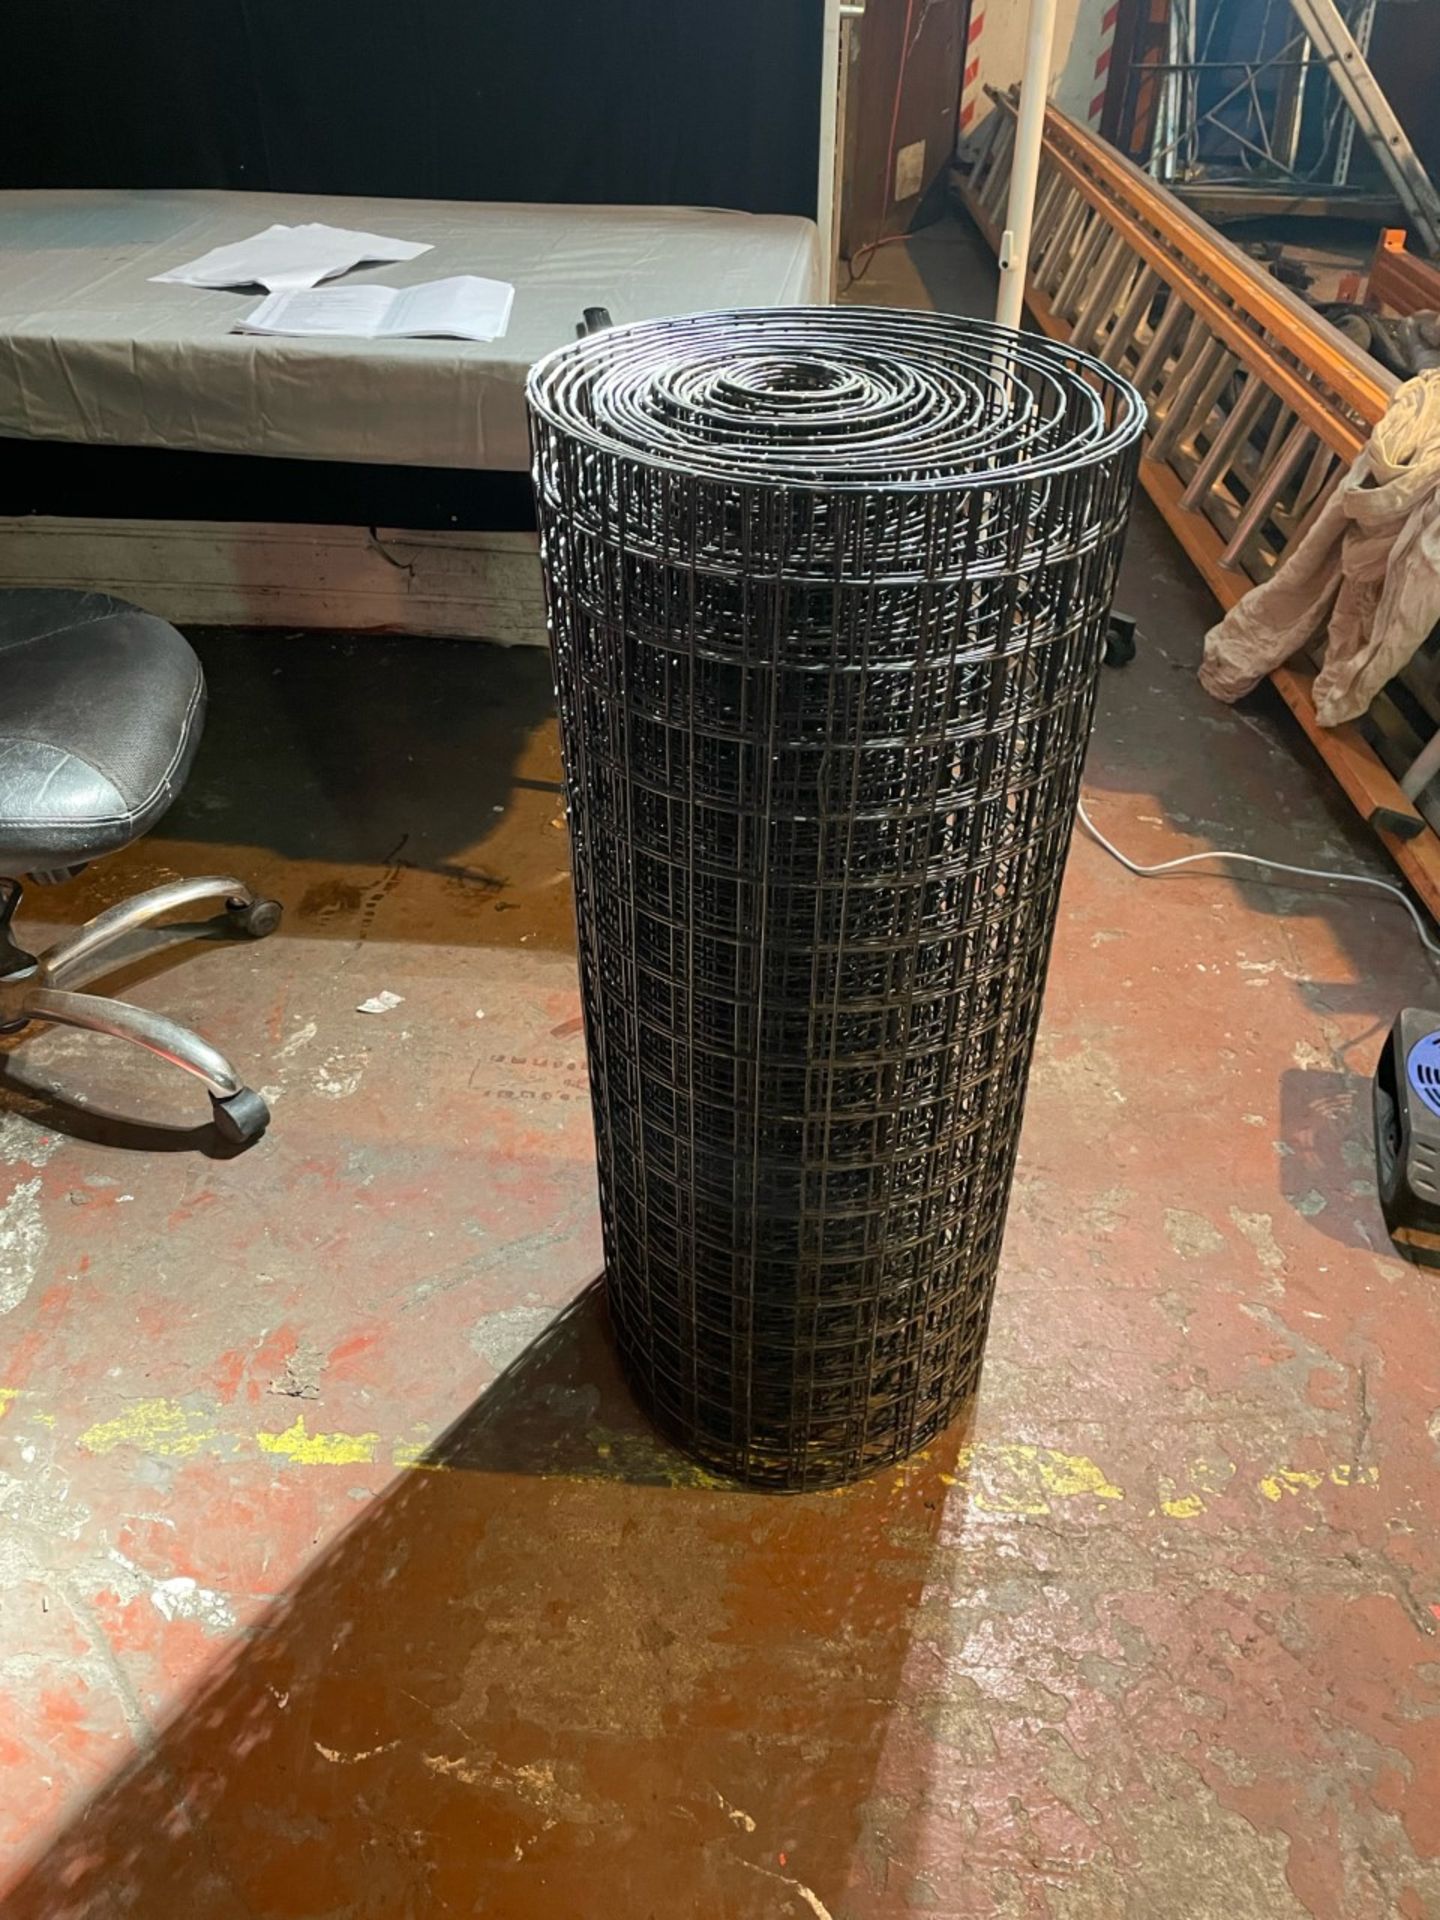 New 25m roll of pvc coated black wire mesh. 3ft tall.